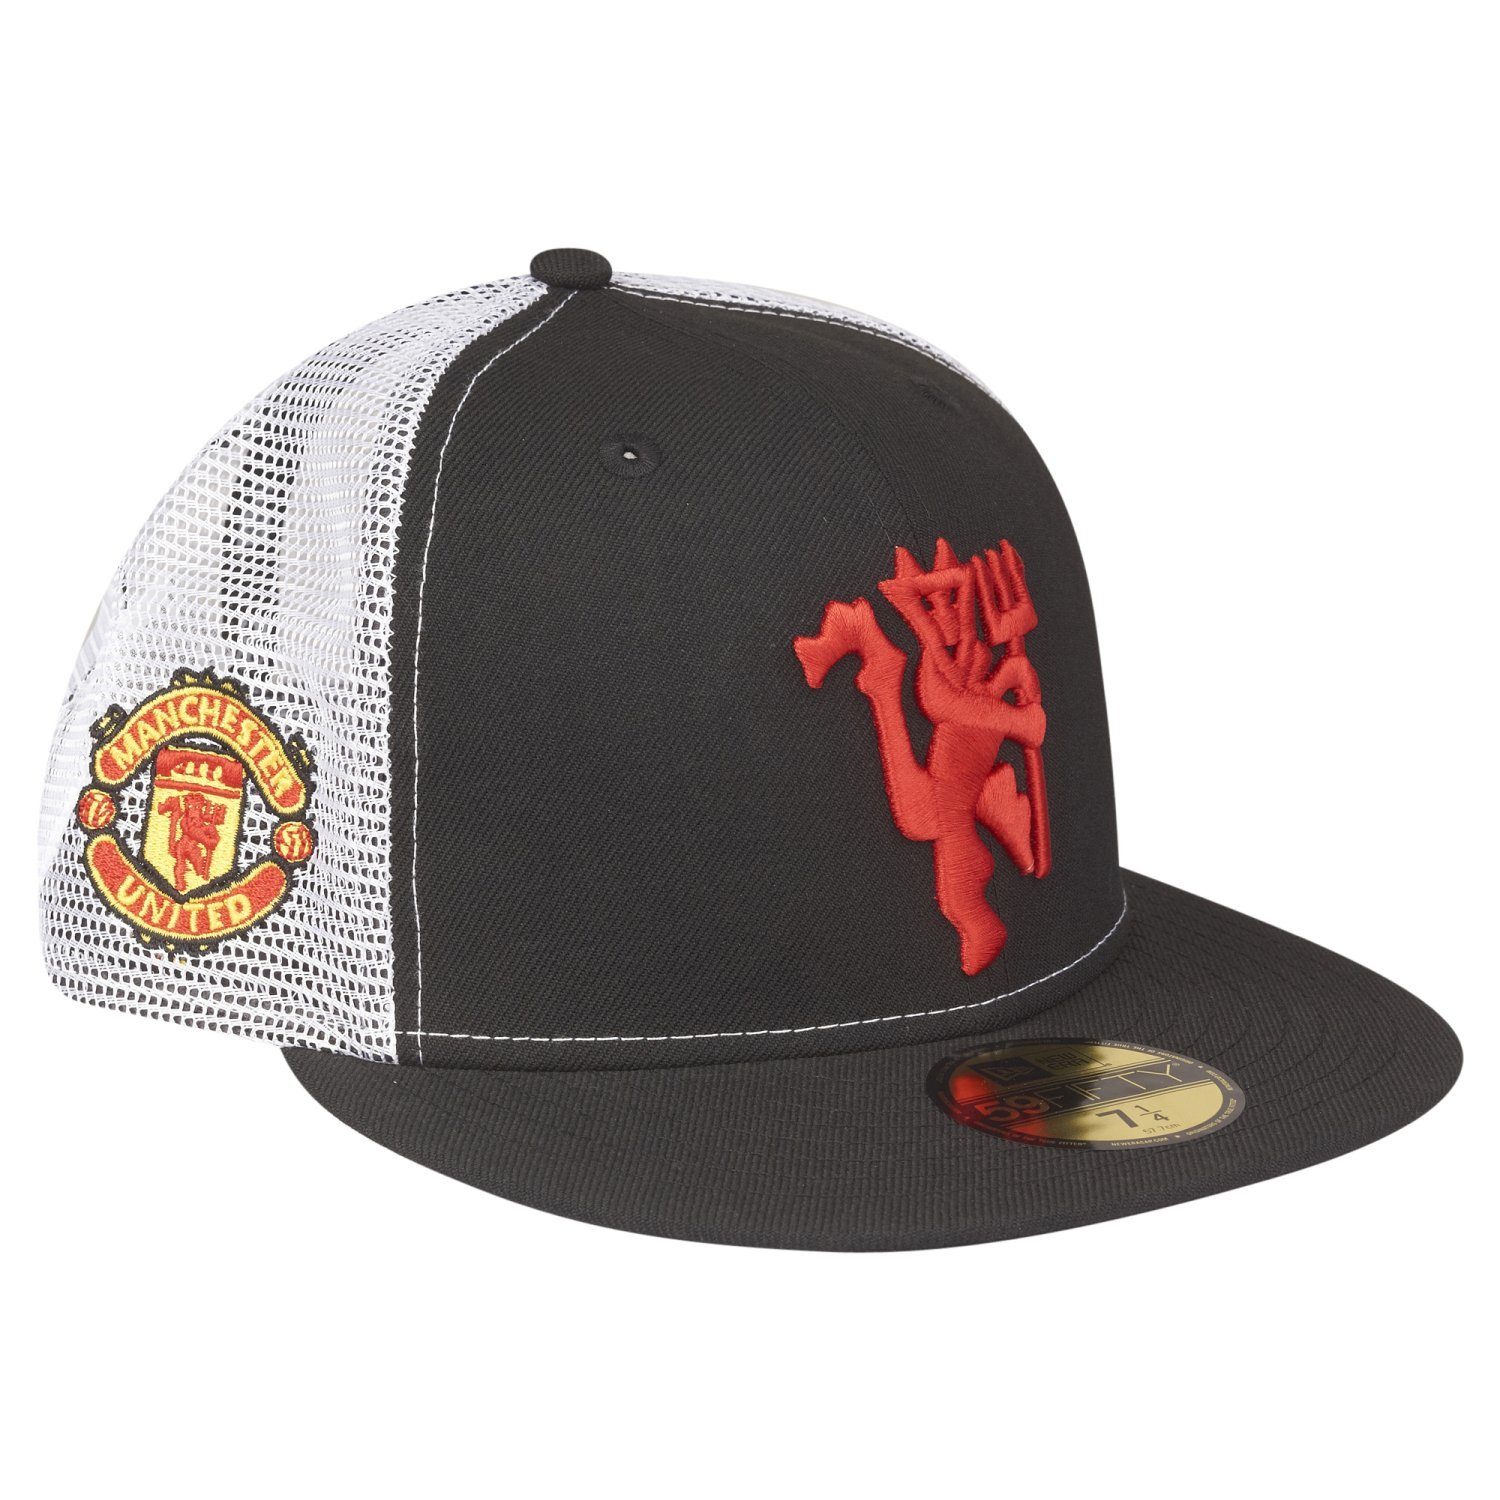 United Cap Manchester Era Fitted DEVIL New 59Fifty